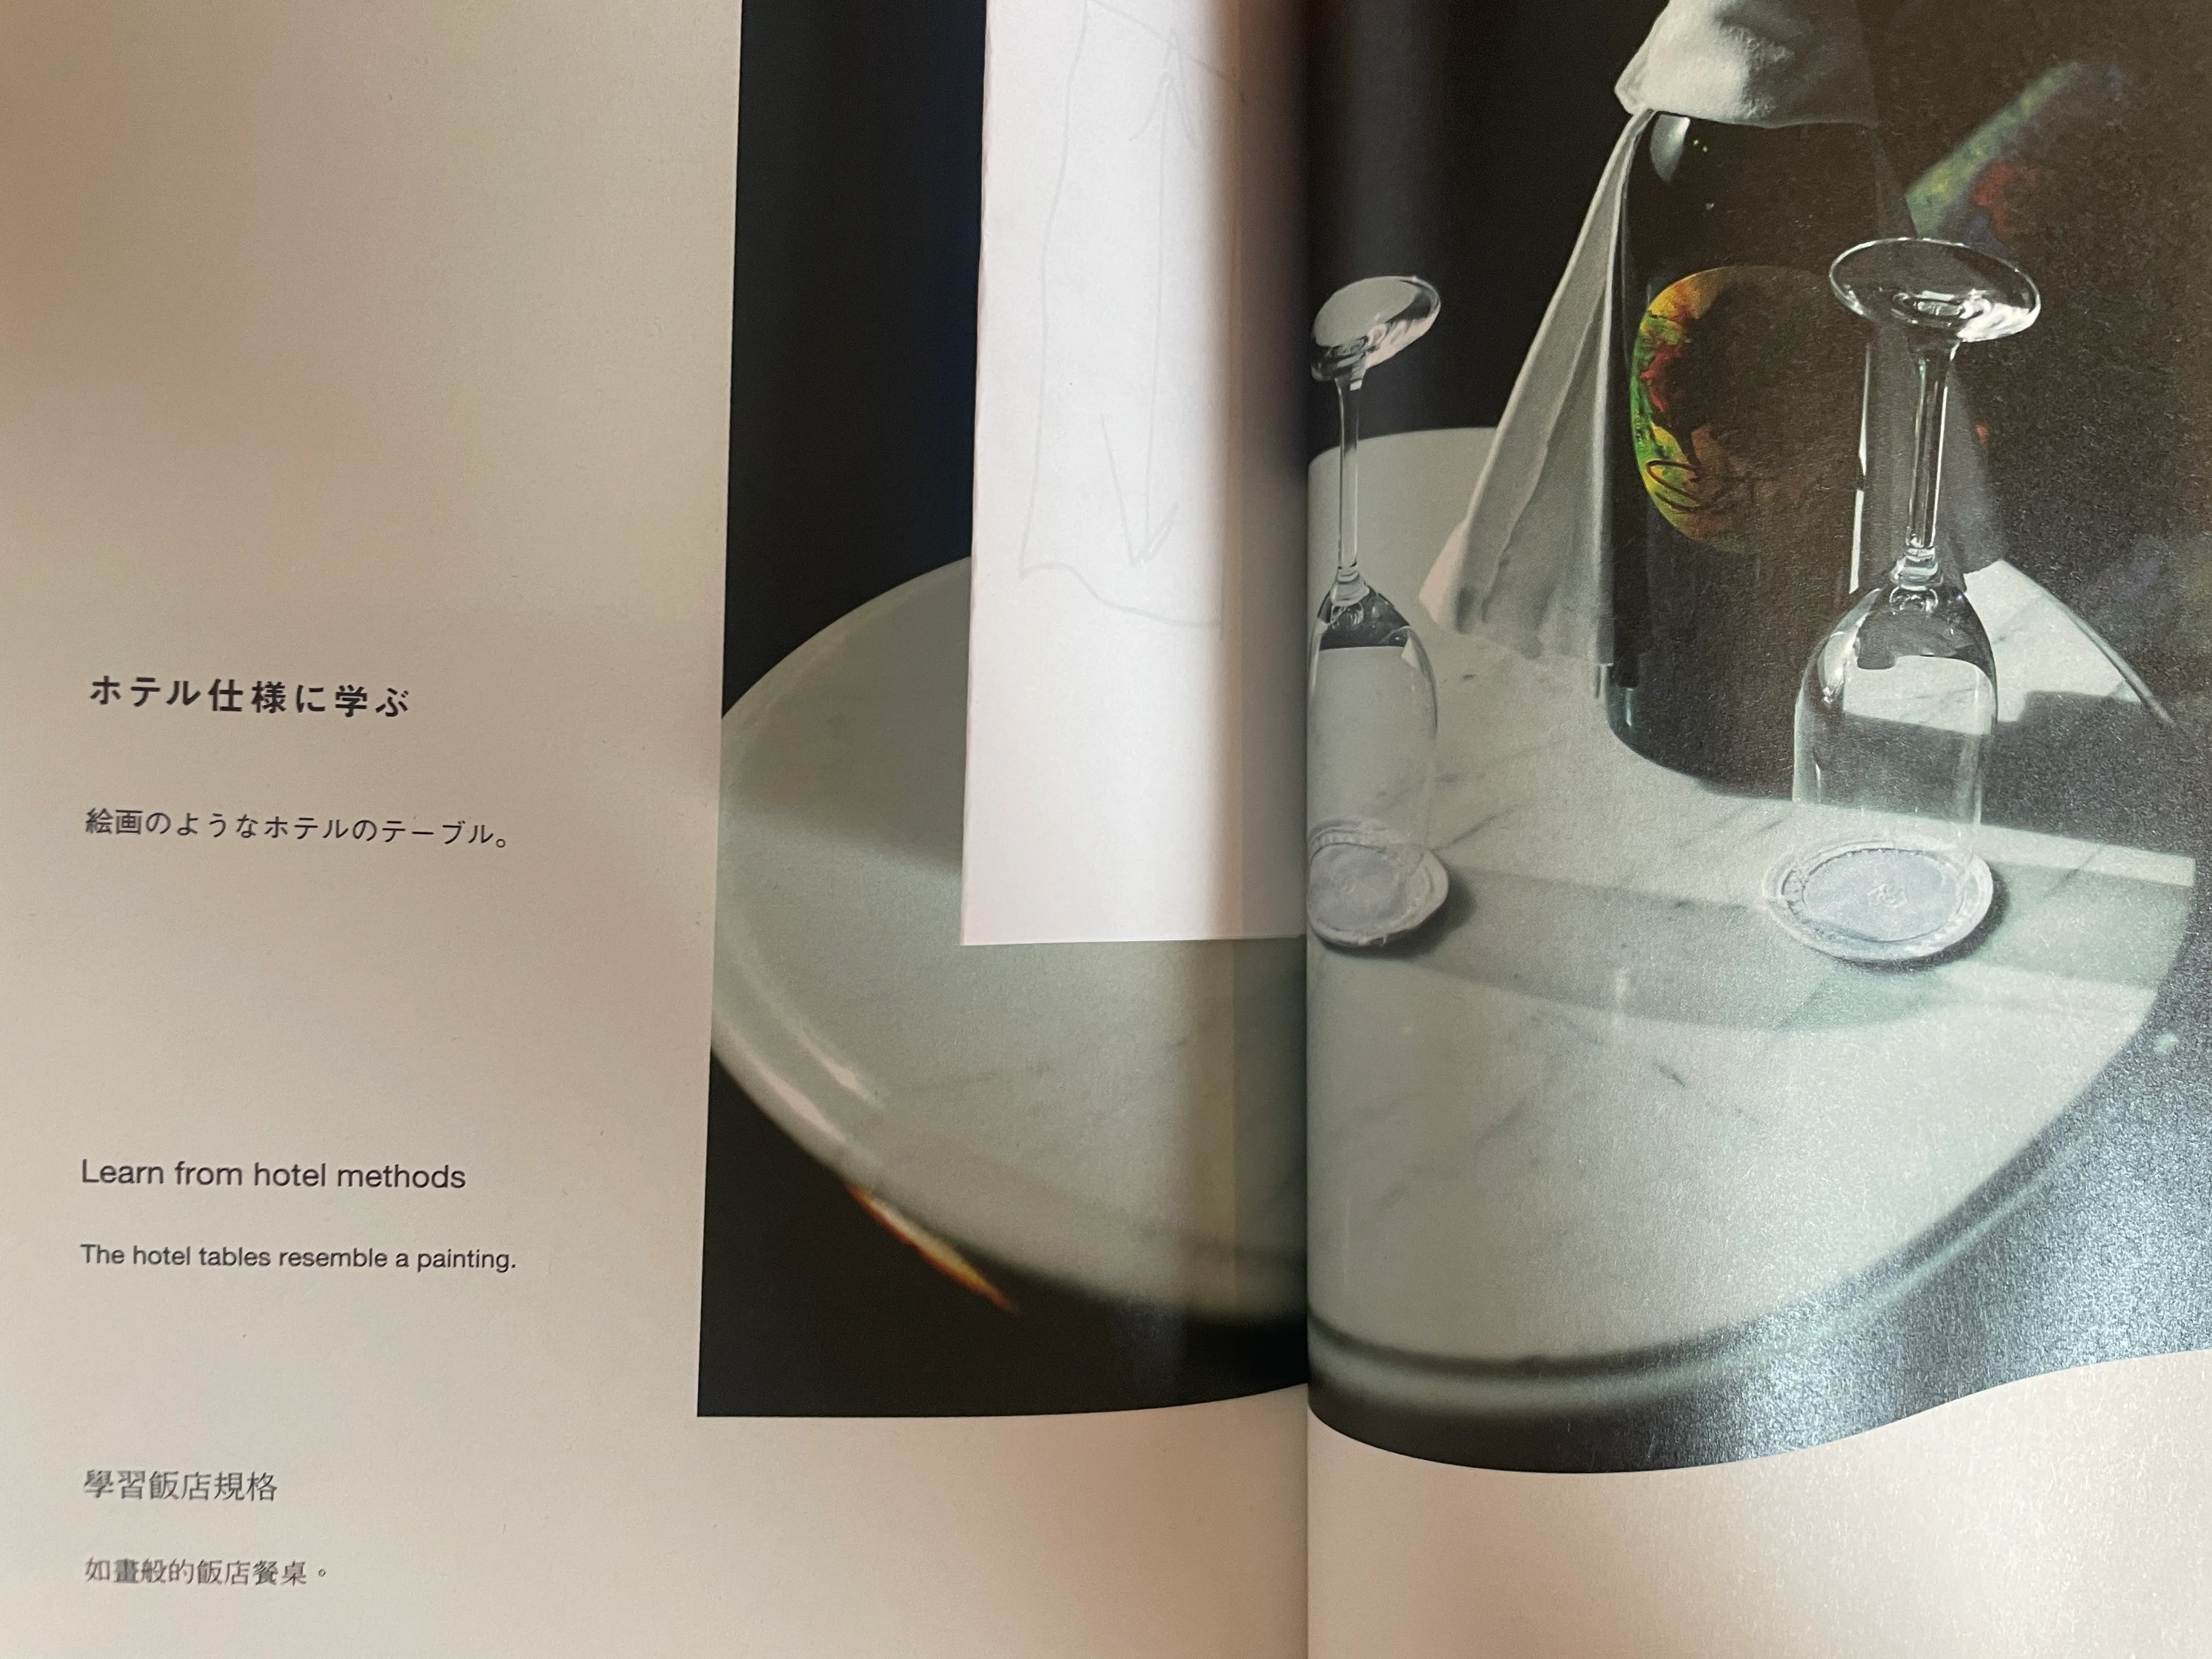 A photograph of favorite moment from Found Muji. Leaning from hotel methods, a beautiful scene of a table, showcasing great hospitality methodology.